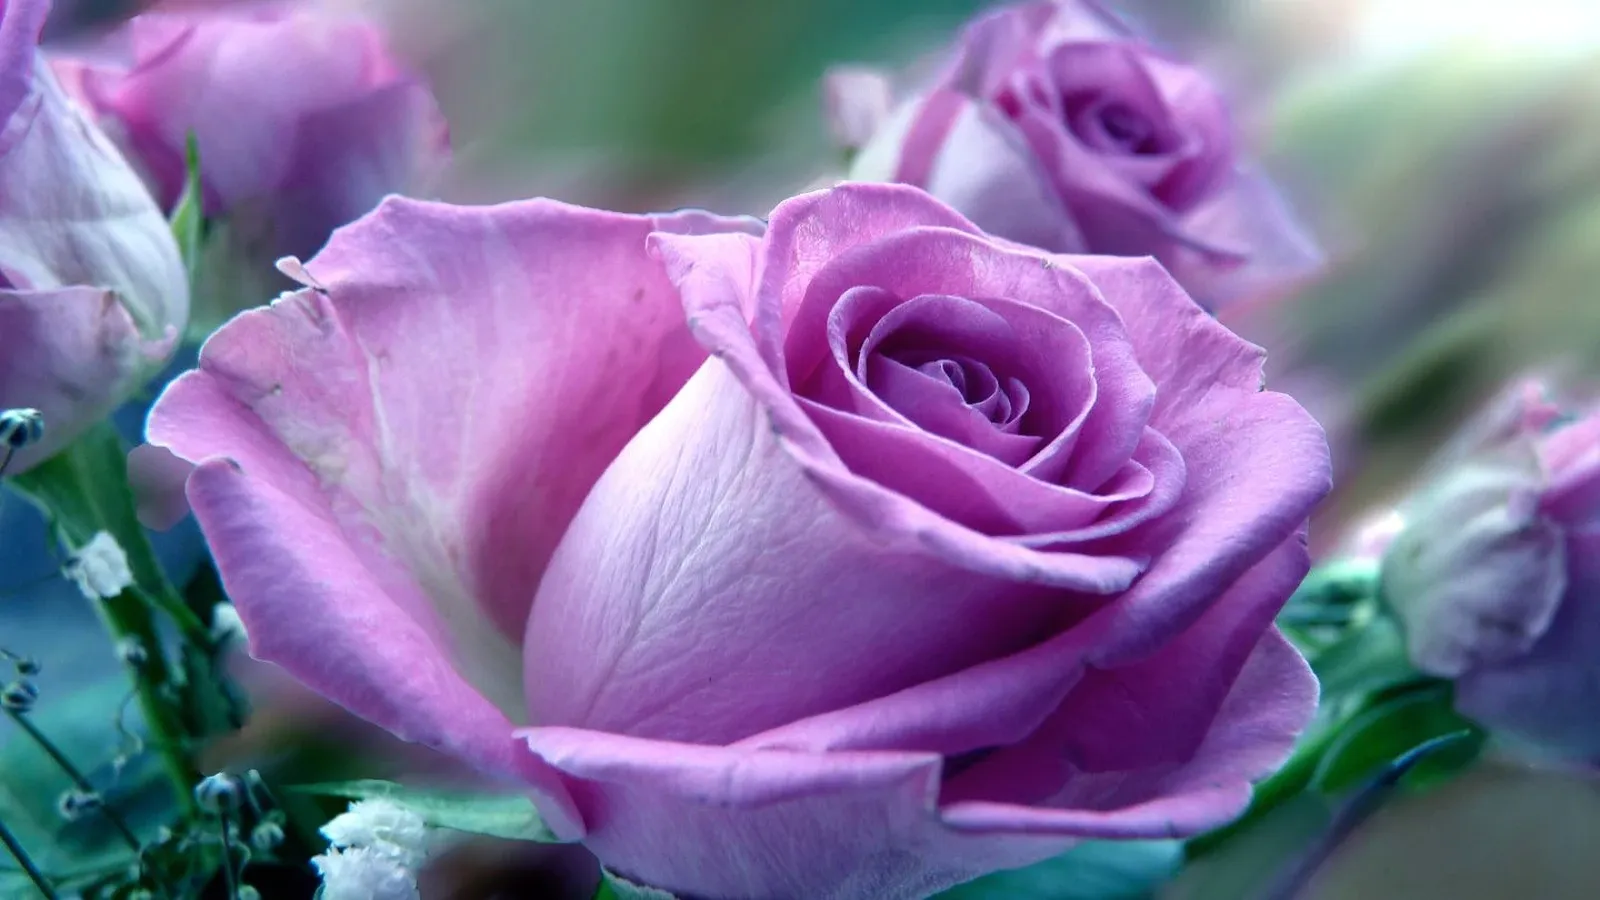 Picture of lavender rose flower - Picture of lavender rose flower - Picture of lavender rose flower - Picture of different colors of rose flower - Rose flower - NeotericIT.com